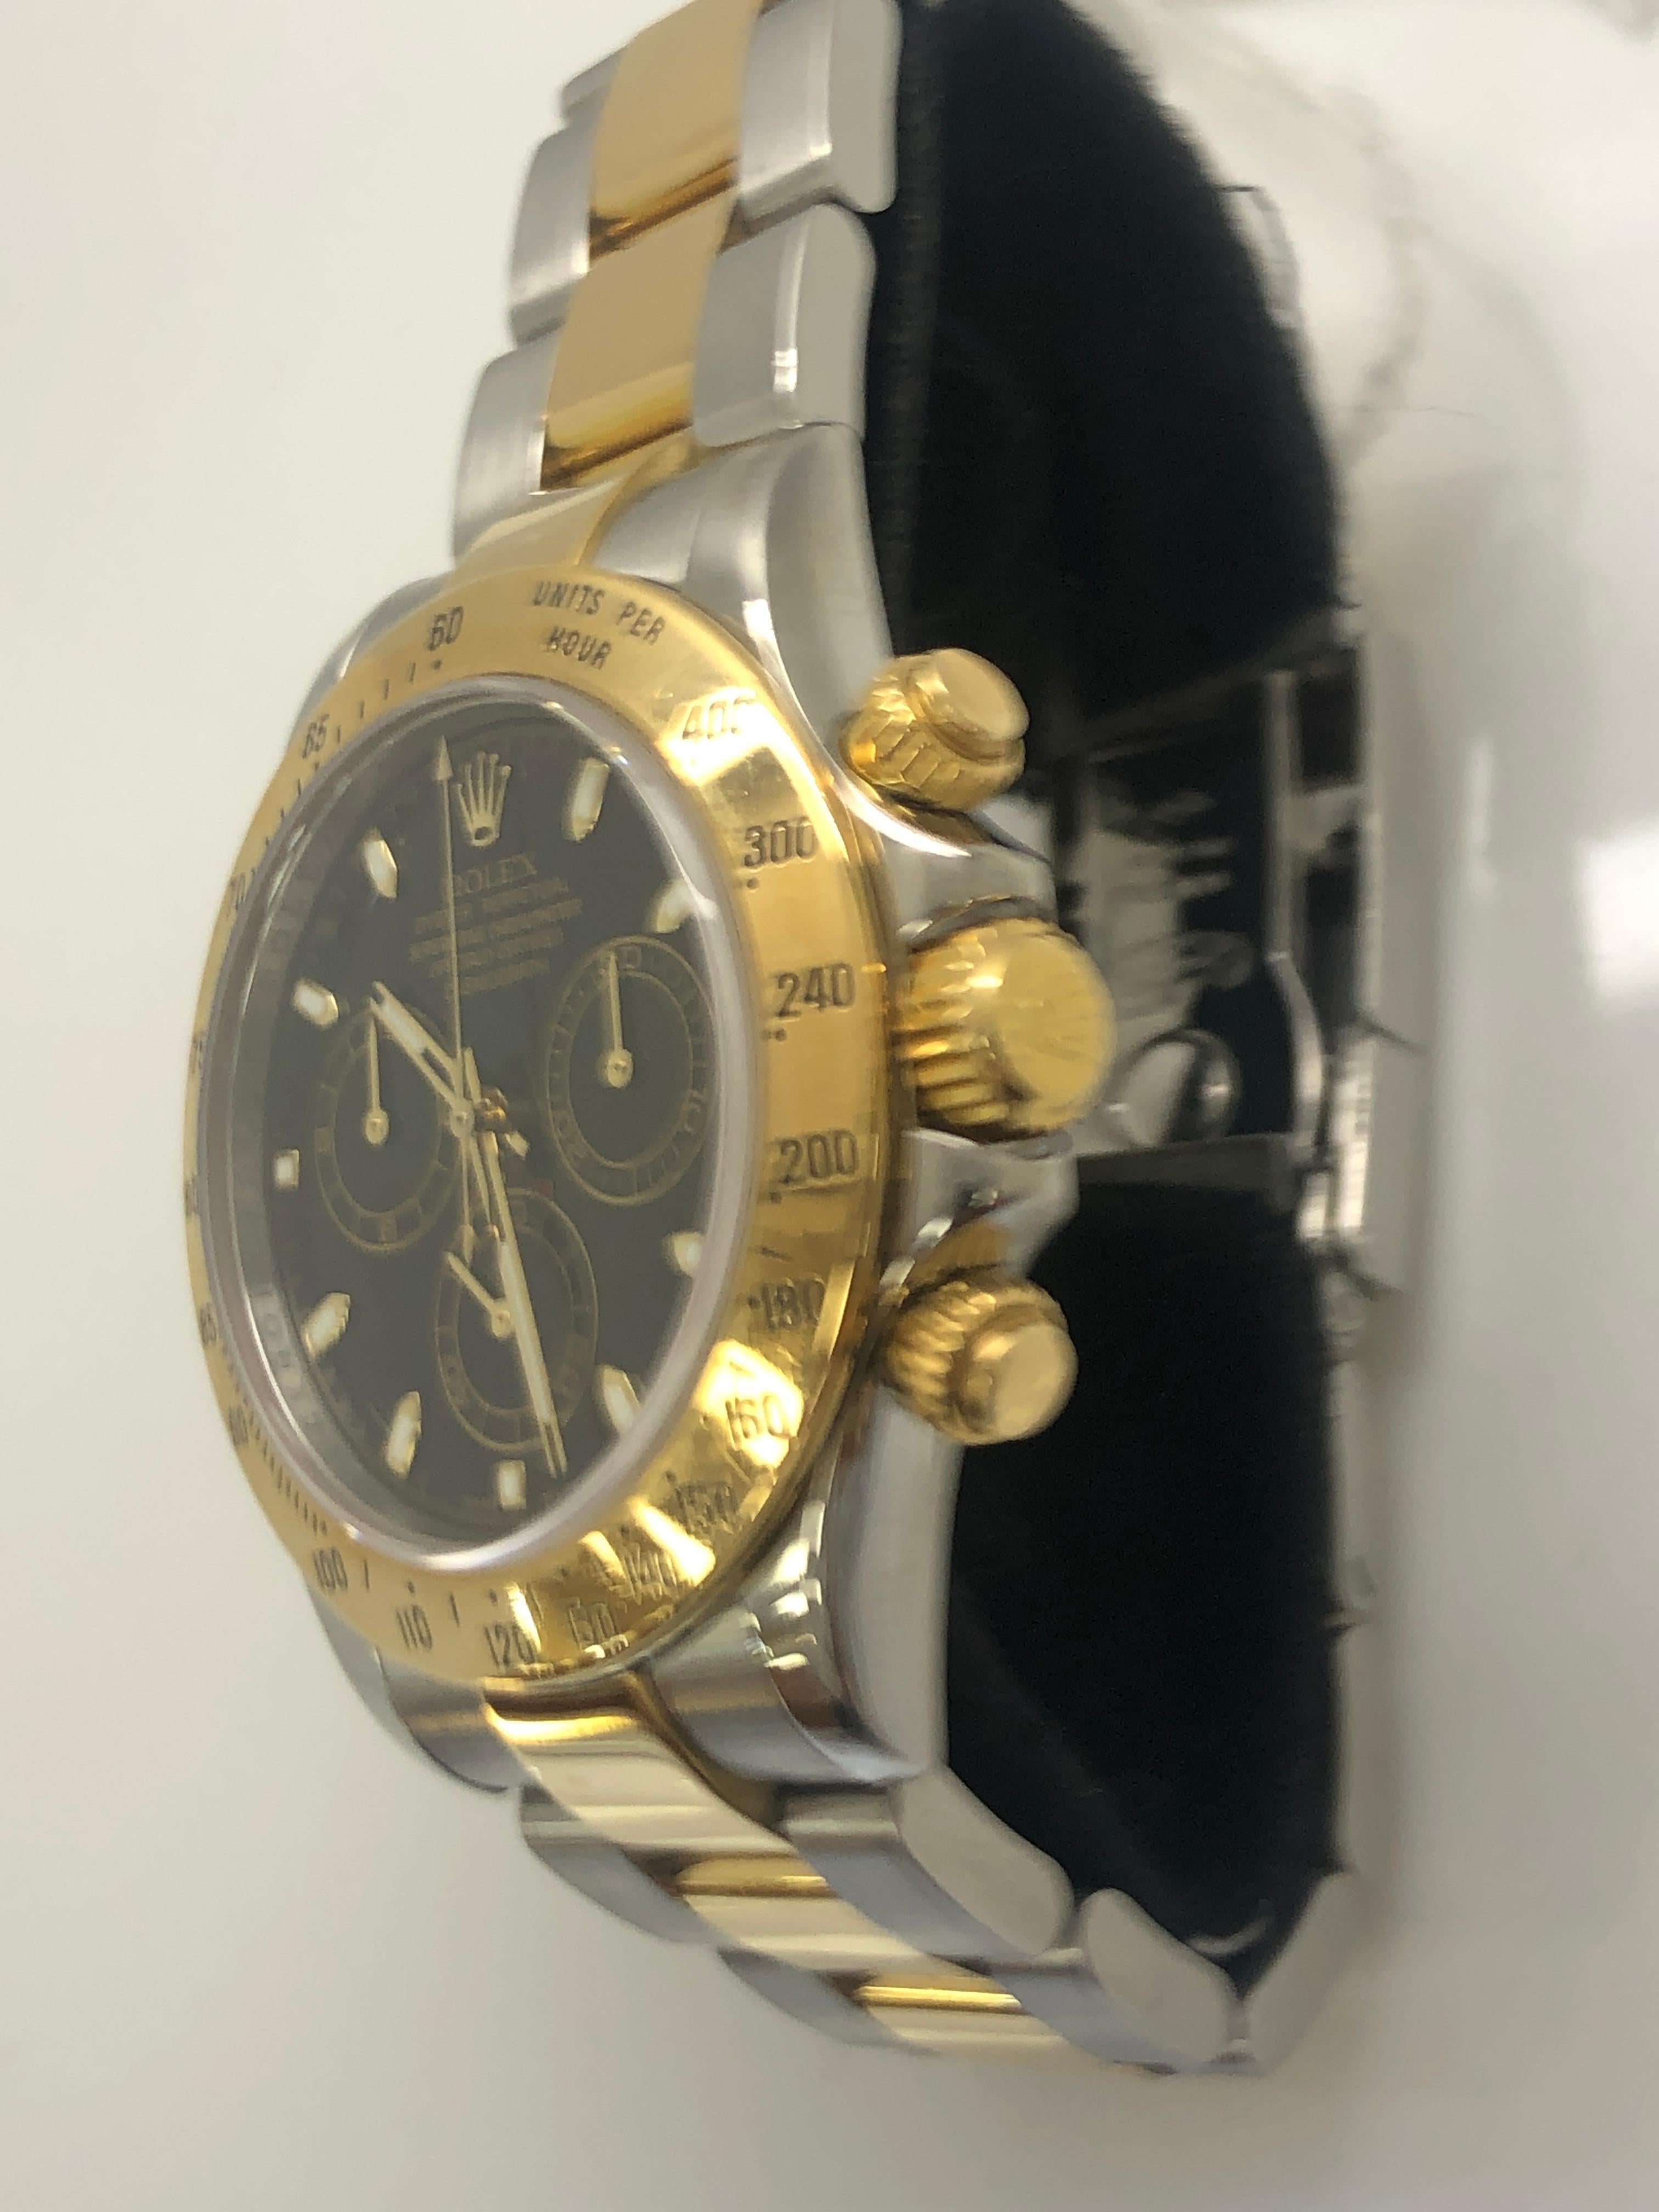 Rolex Daytona Two Tone 2008 Mint Men's Watch

excellent condition

runs perfect

bank wire only

shop with confidence 

free overnight shipping